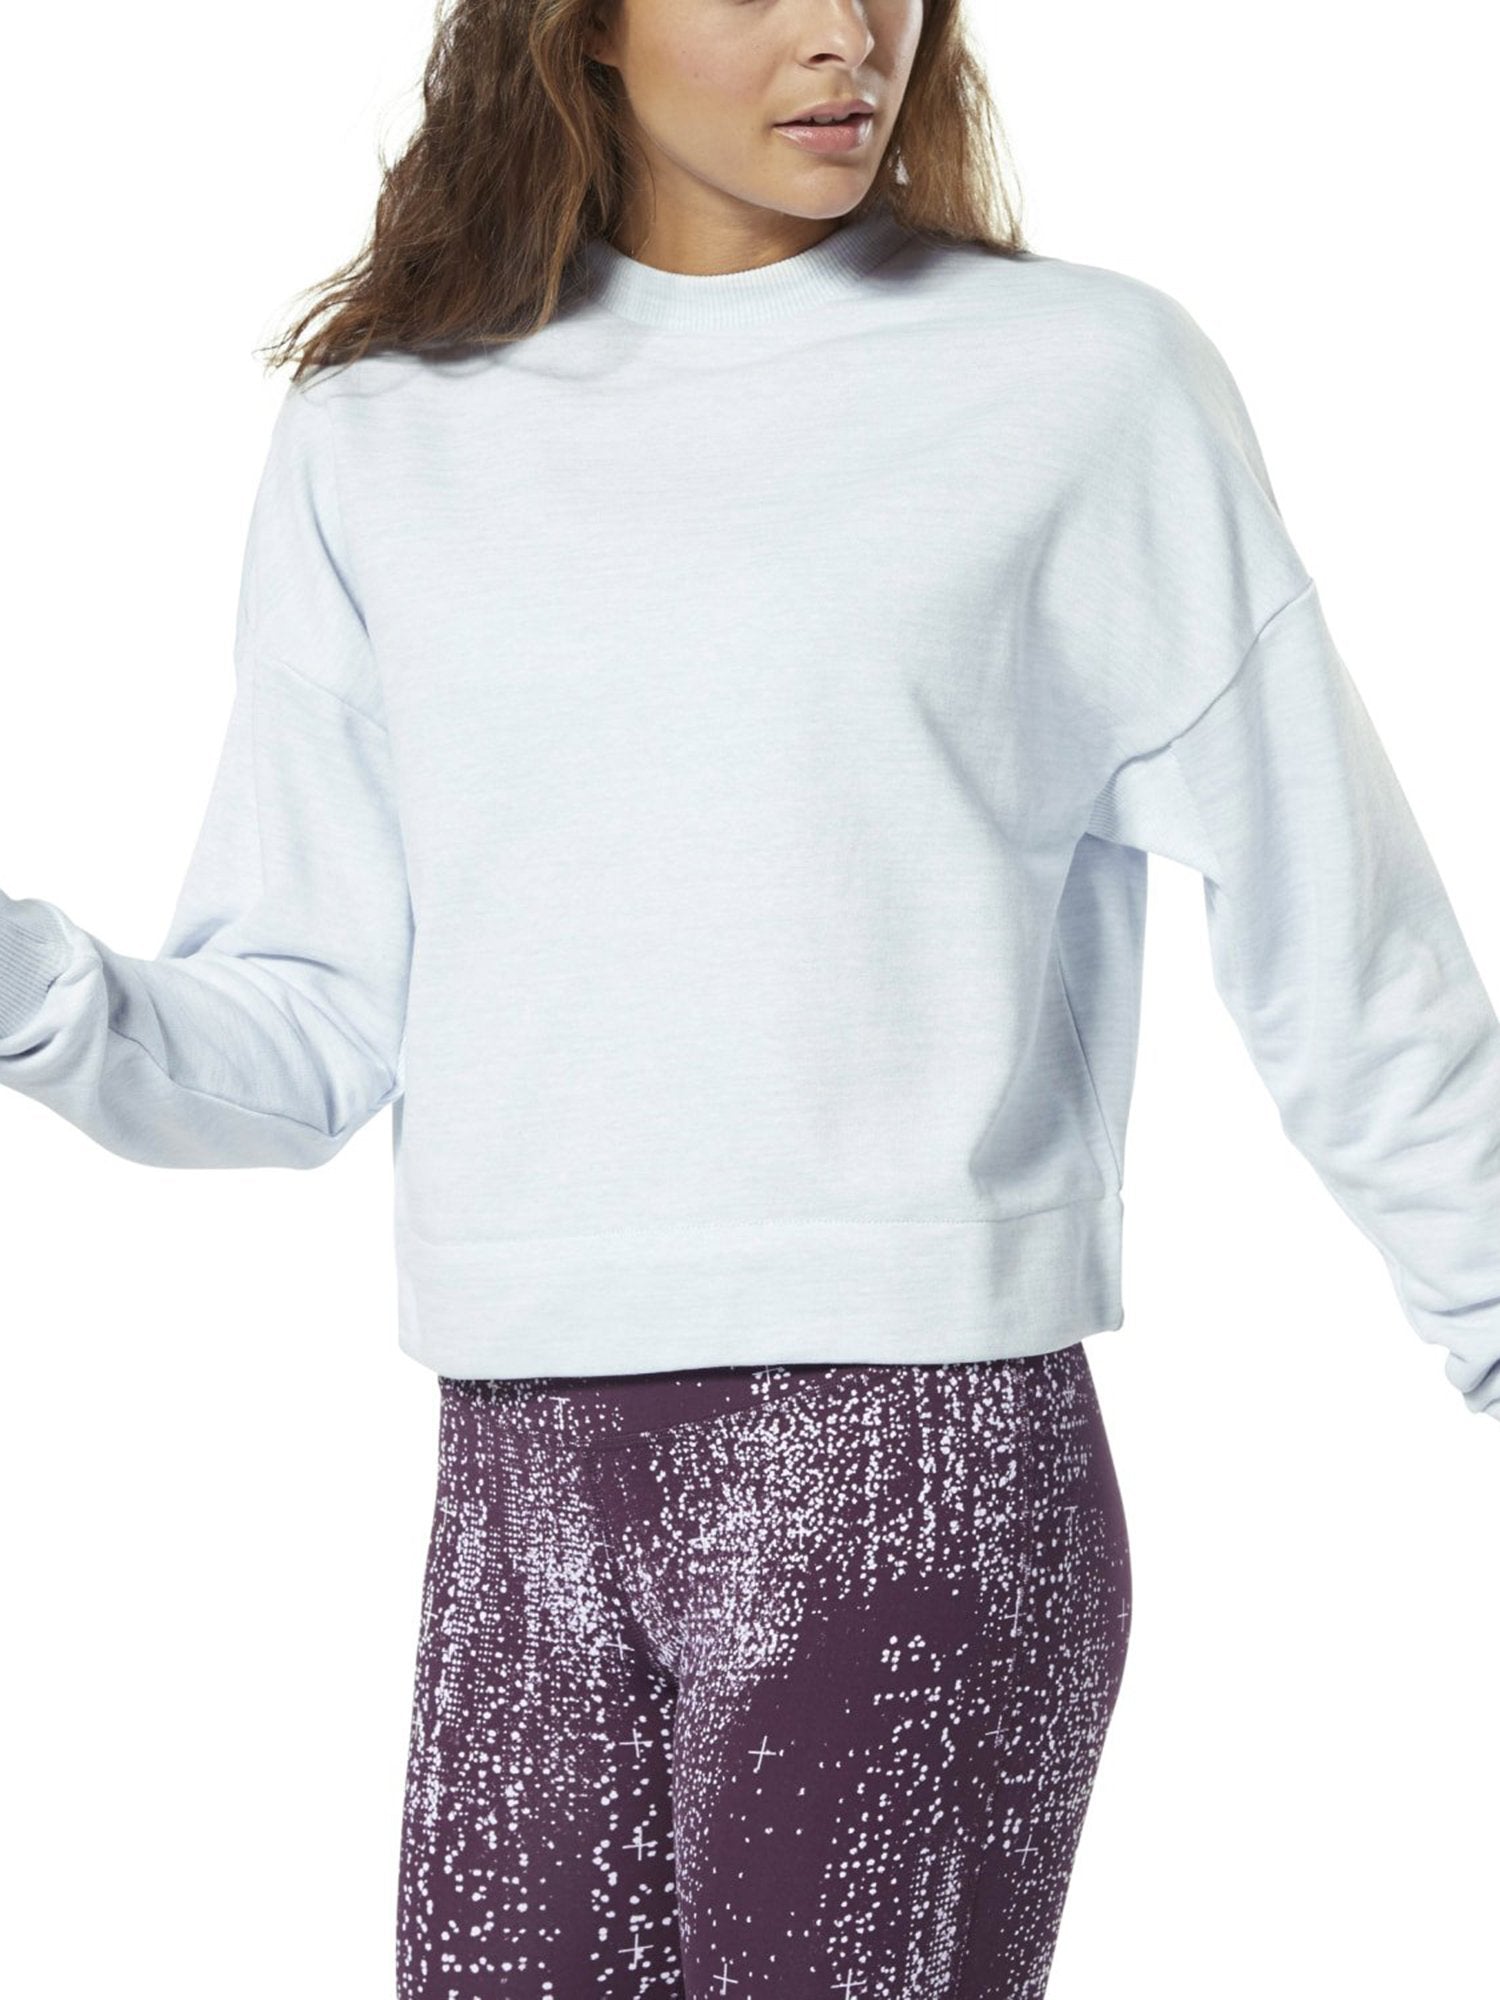 NYC Polo Training Essentials Marble Crew Sweatshirt For Ladies-Ice Mint Melange-BE168/BR978